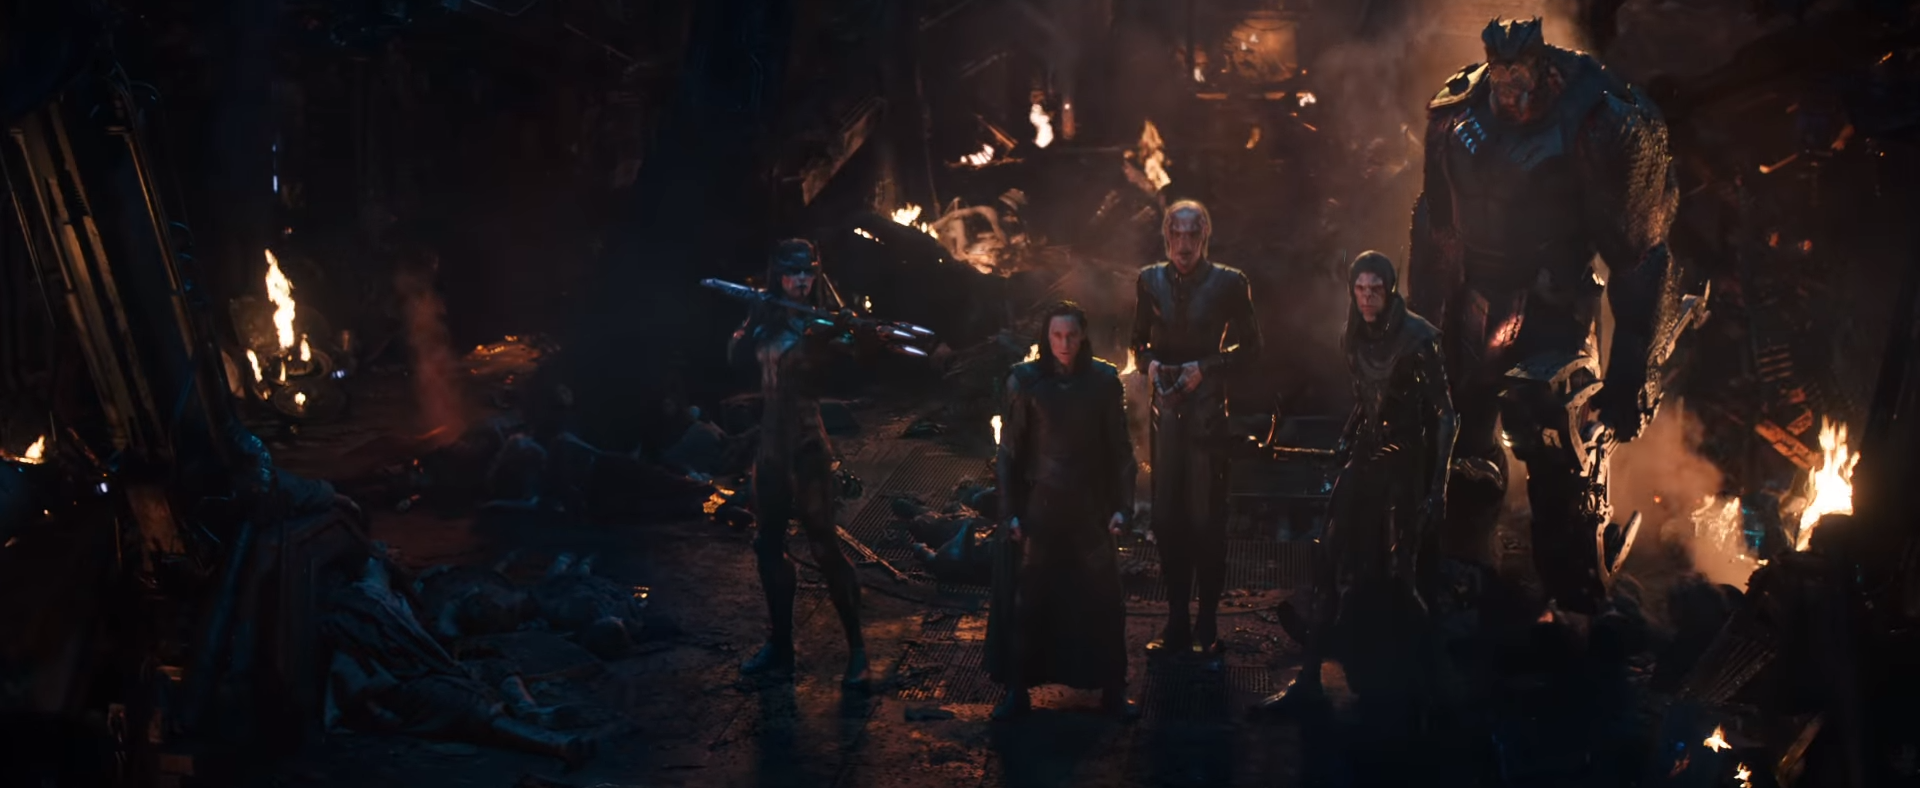 Everything We Learned About The Avengers’ Fight Against Thanos In The Latest Infinity War Trailer